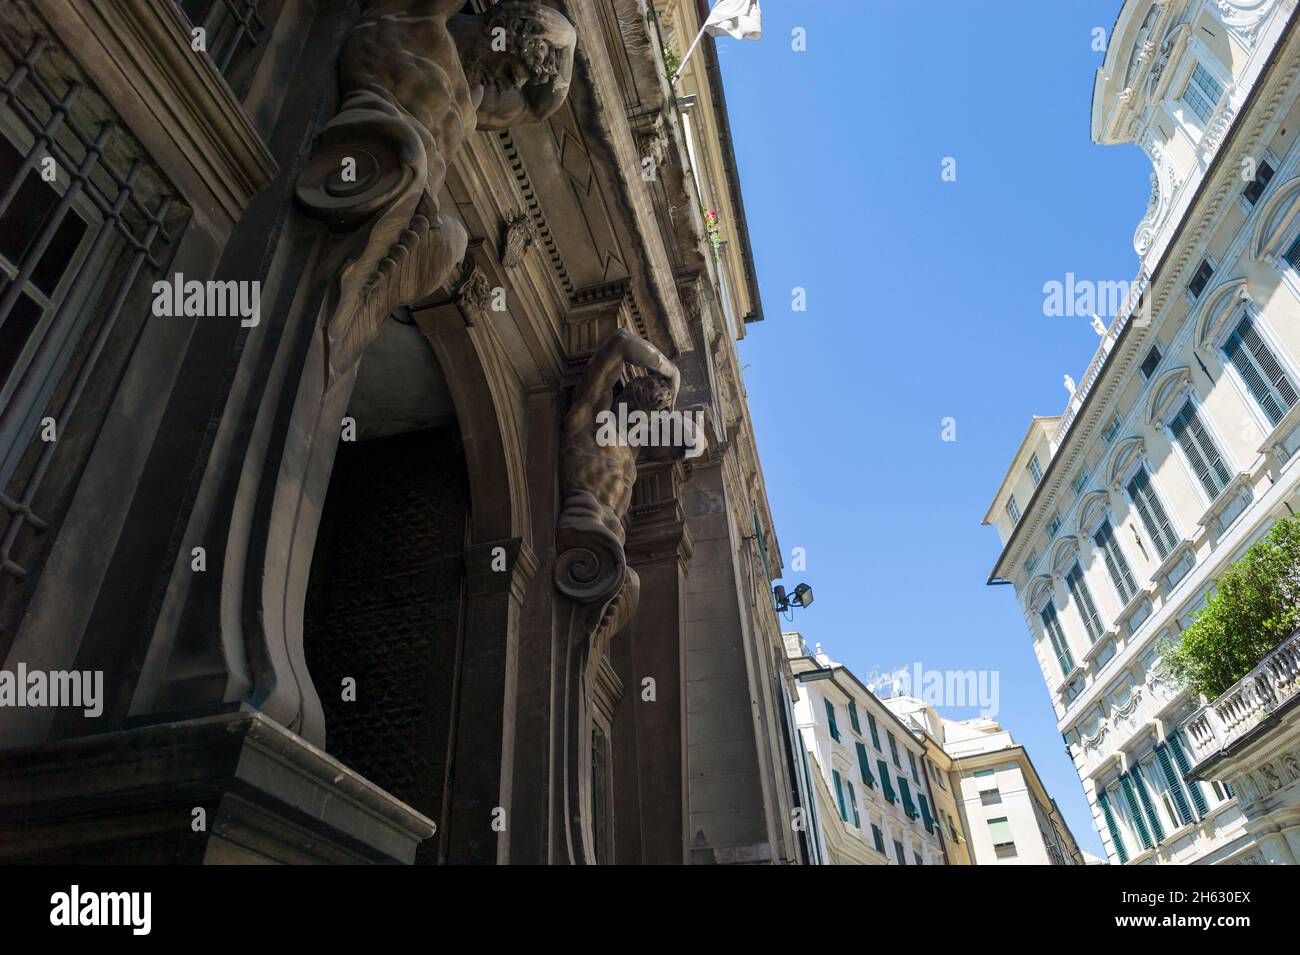 just some street photography in the city of genova (genoa),the capital of liguria region in italy Stock Photo